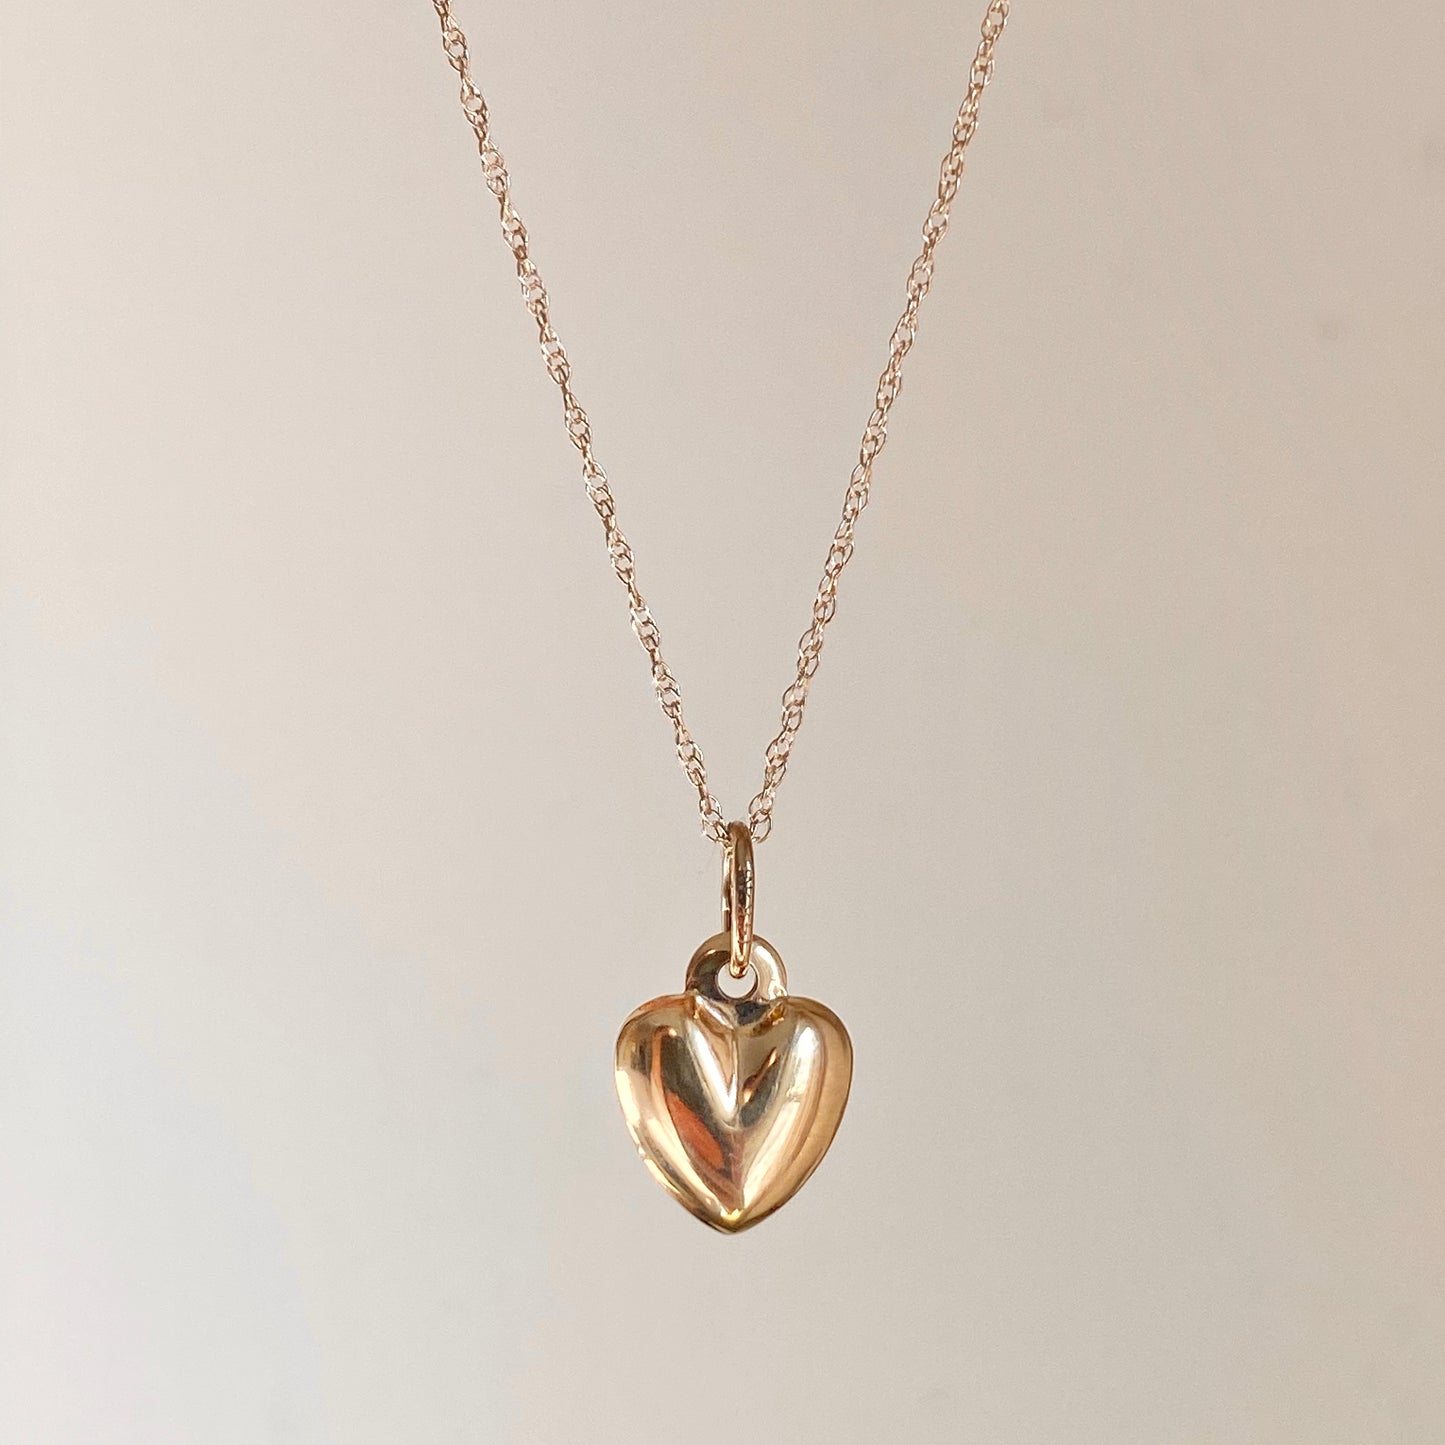 14KT Yellow Gold Small 3-D Heart Pendant Chain Necklace, 14KT Yellow Gold Small 3-D Heart Pendant Chain Necklace - Legacy Saint Jewelry